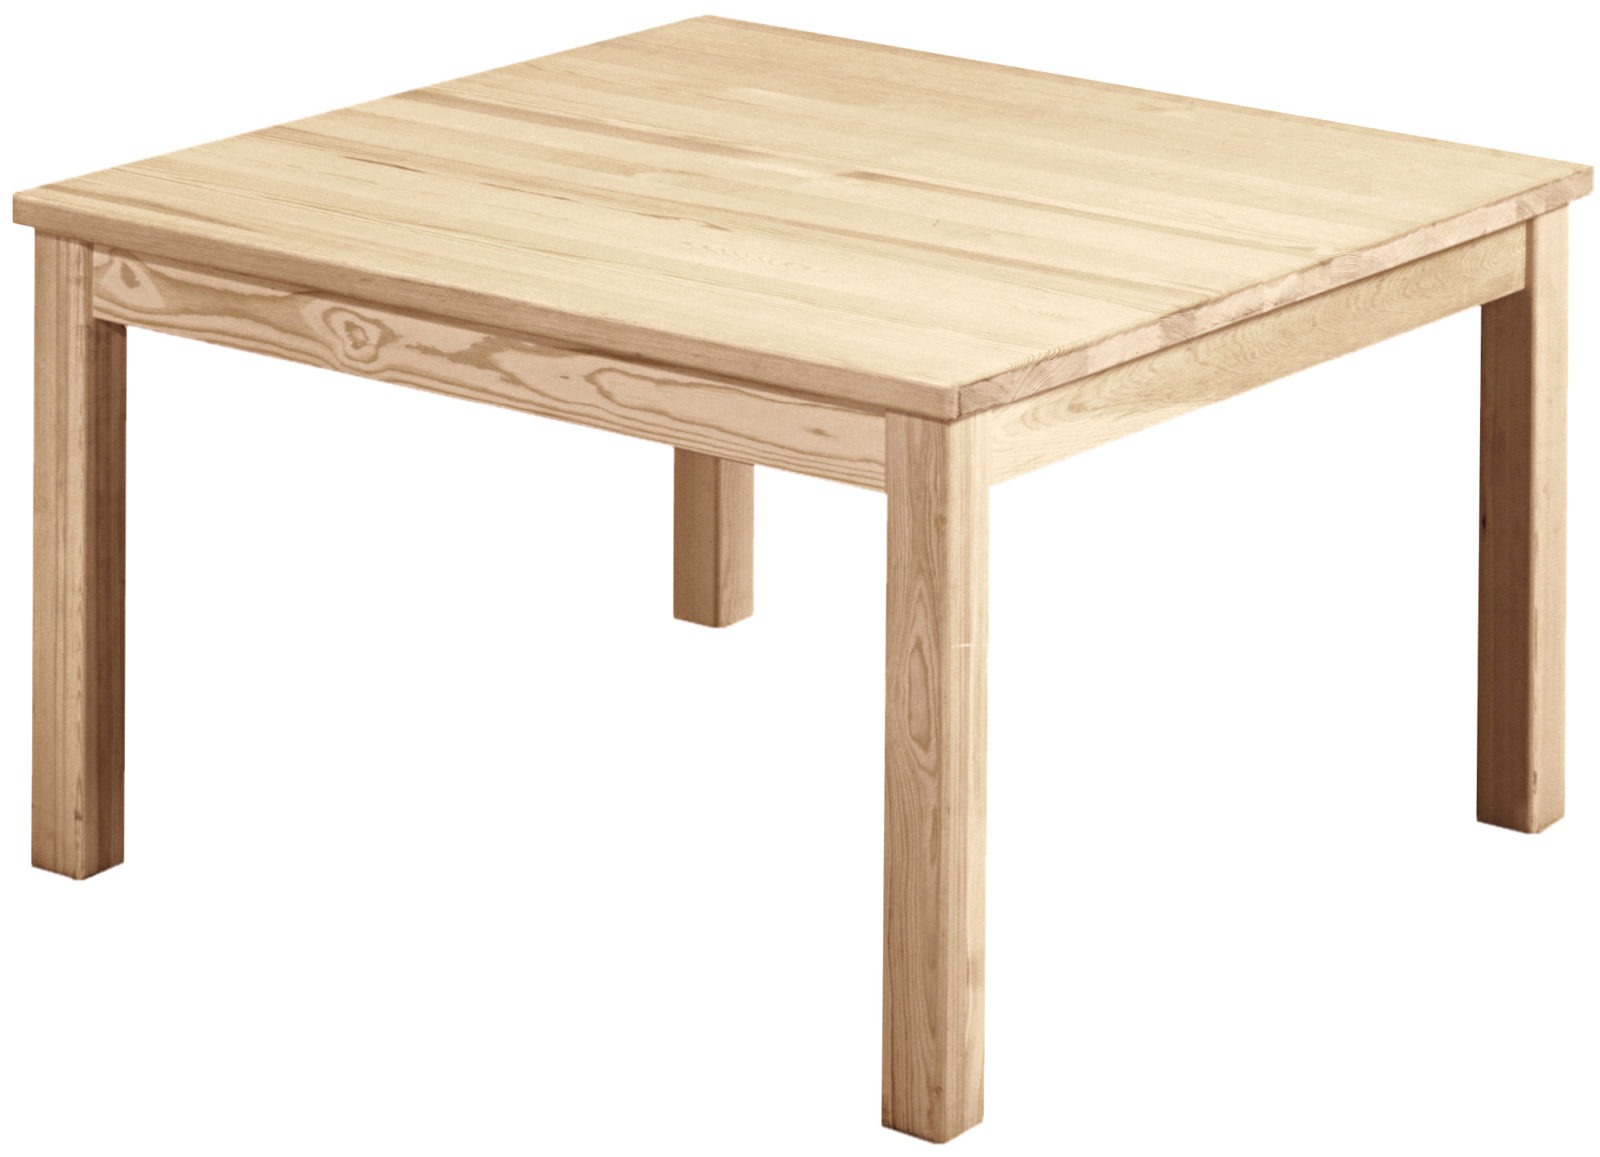 Rustic table made of untreated pine, STABIL.